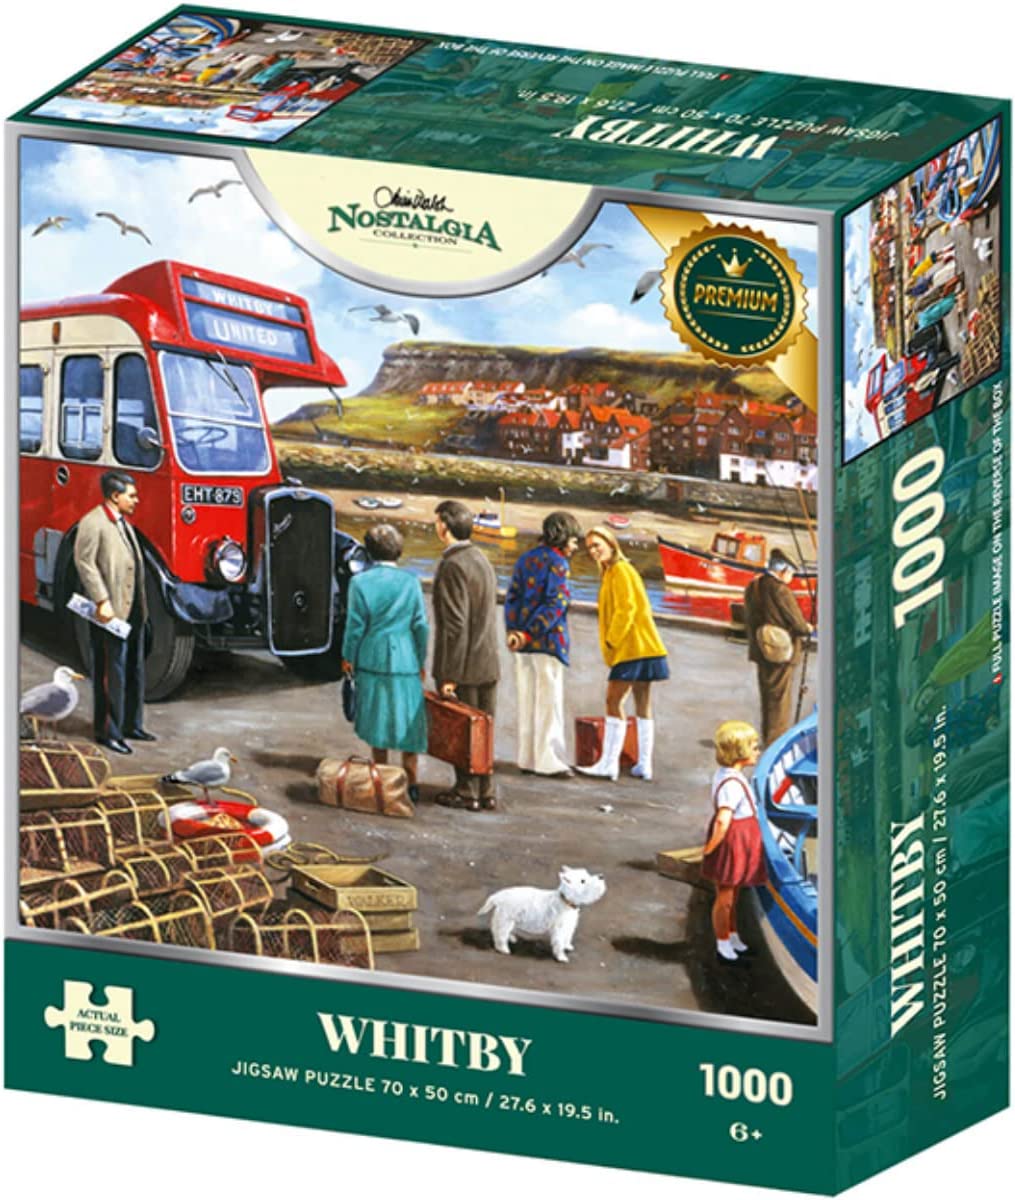 Kidicraft - Kevin Walsh - Whitby - 1000 Piece Jigsaw Puzzle